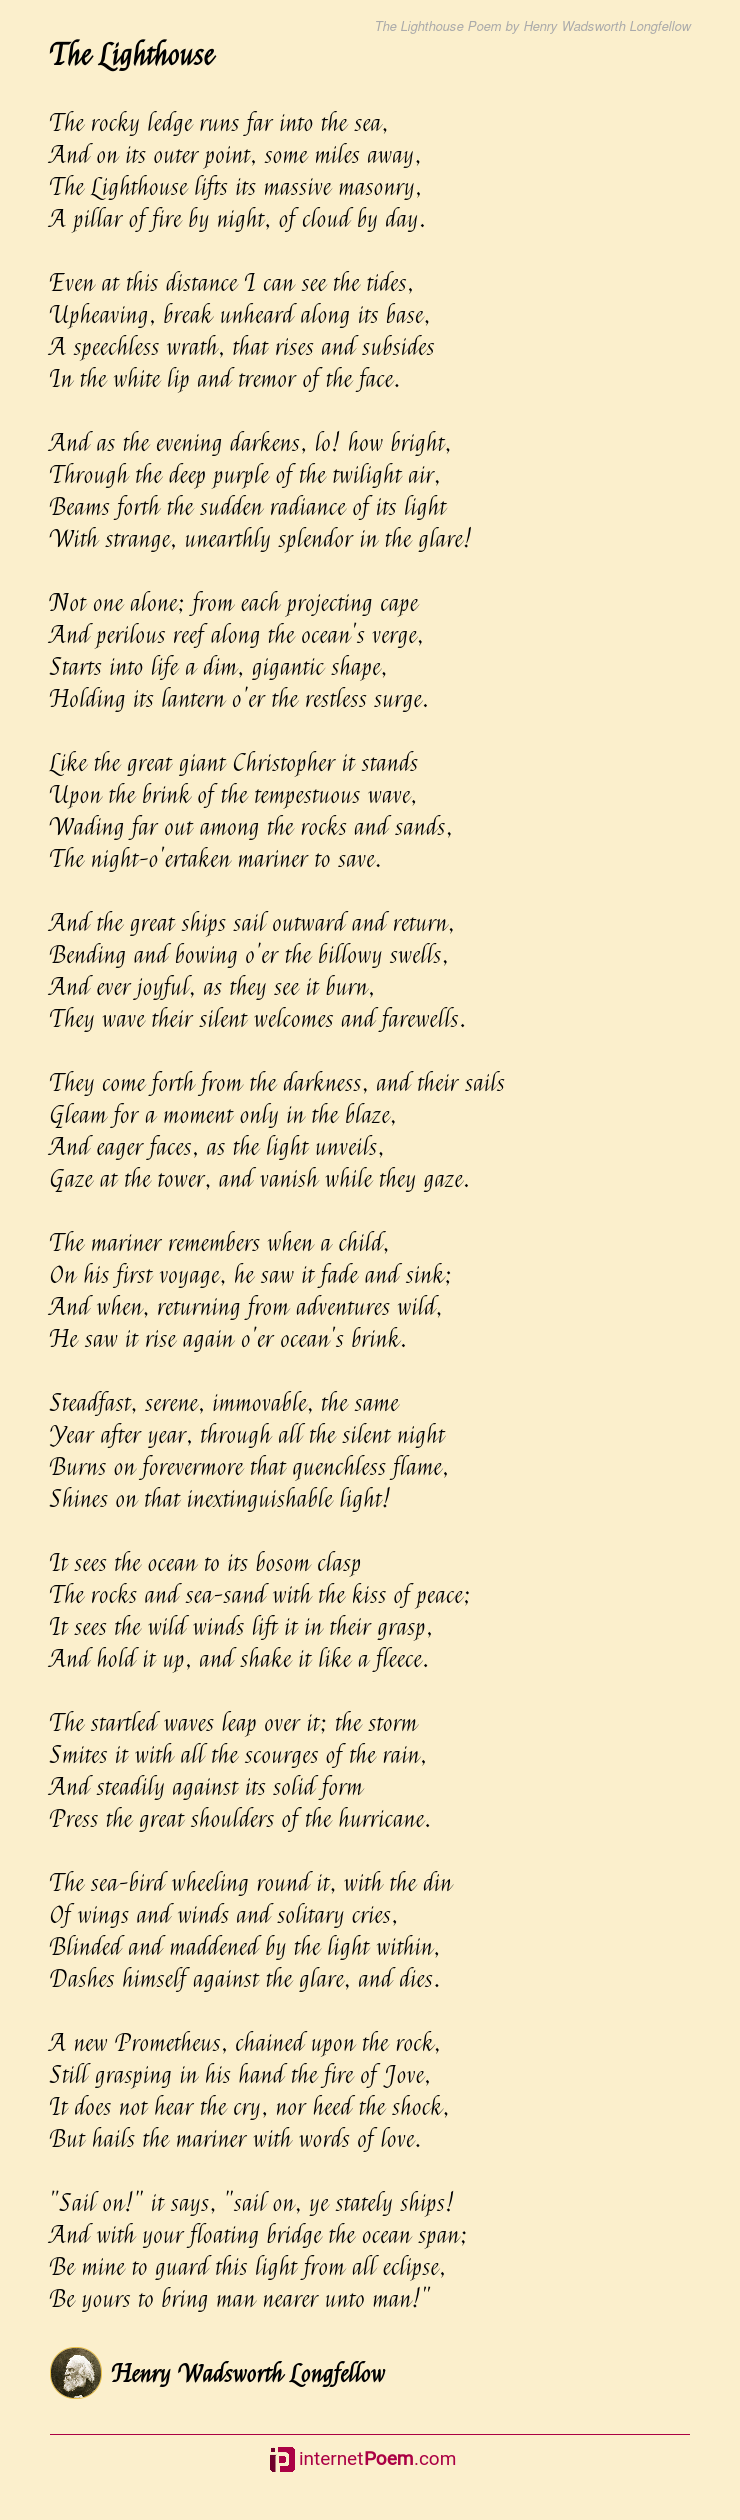 The Lighthouse Poem By Henry Wadsworth Longfellow 8728